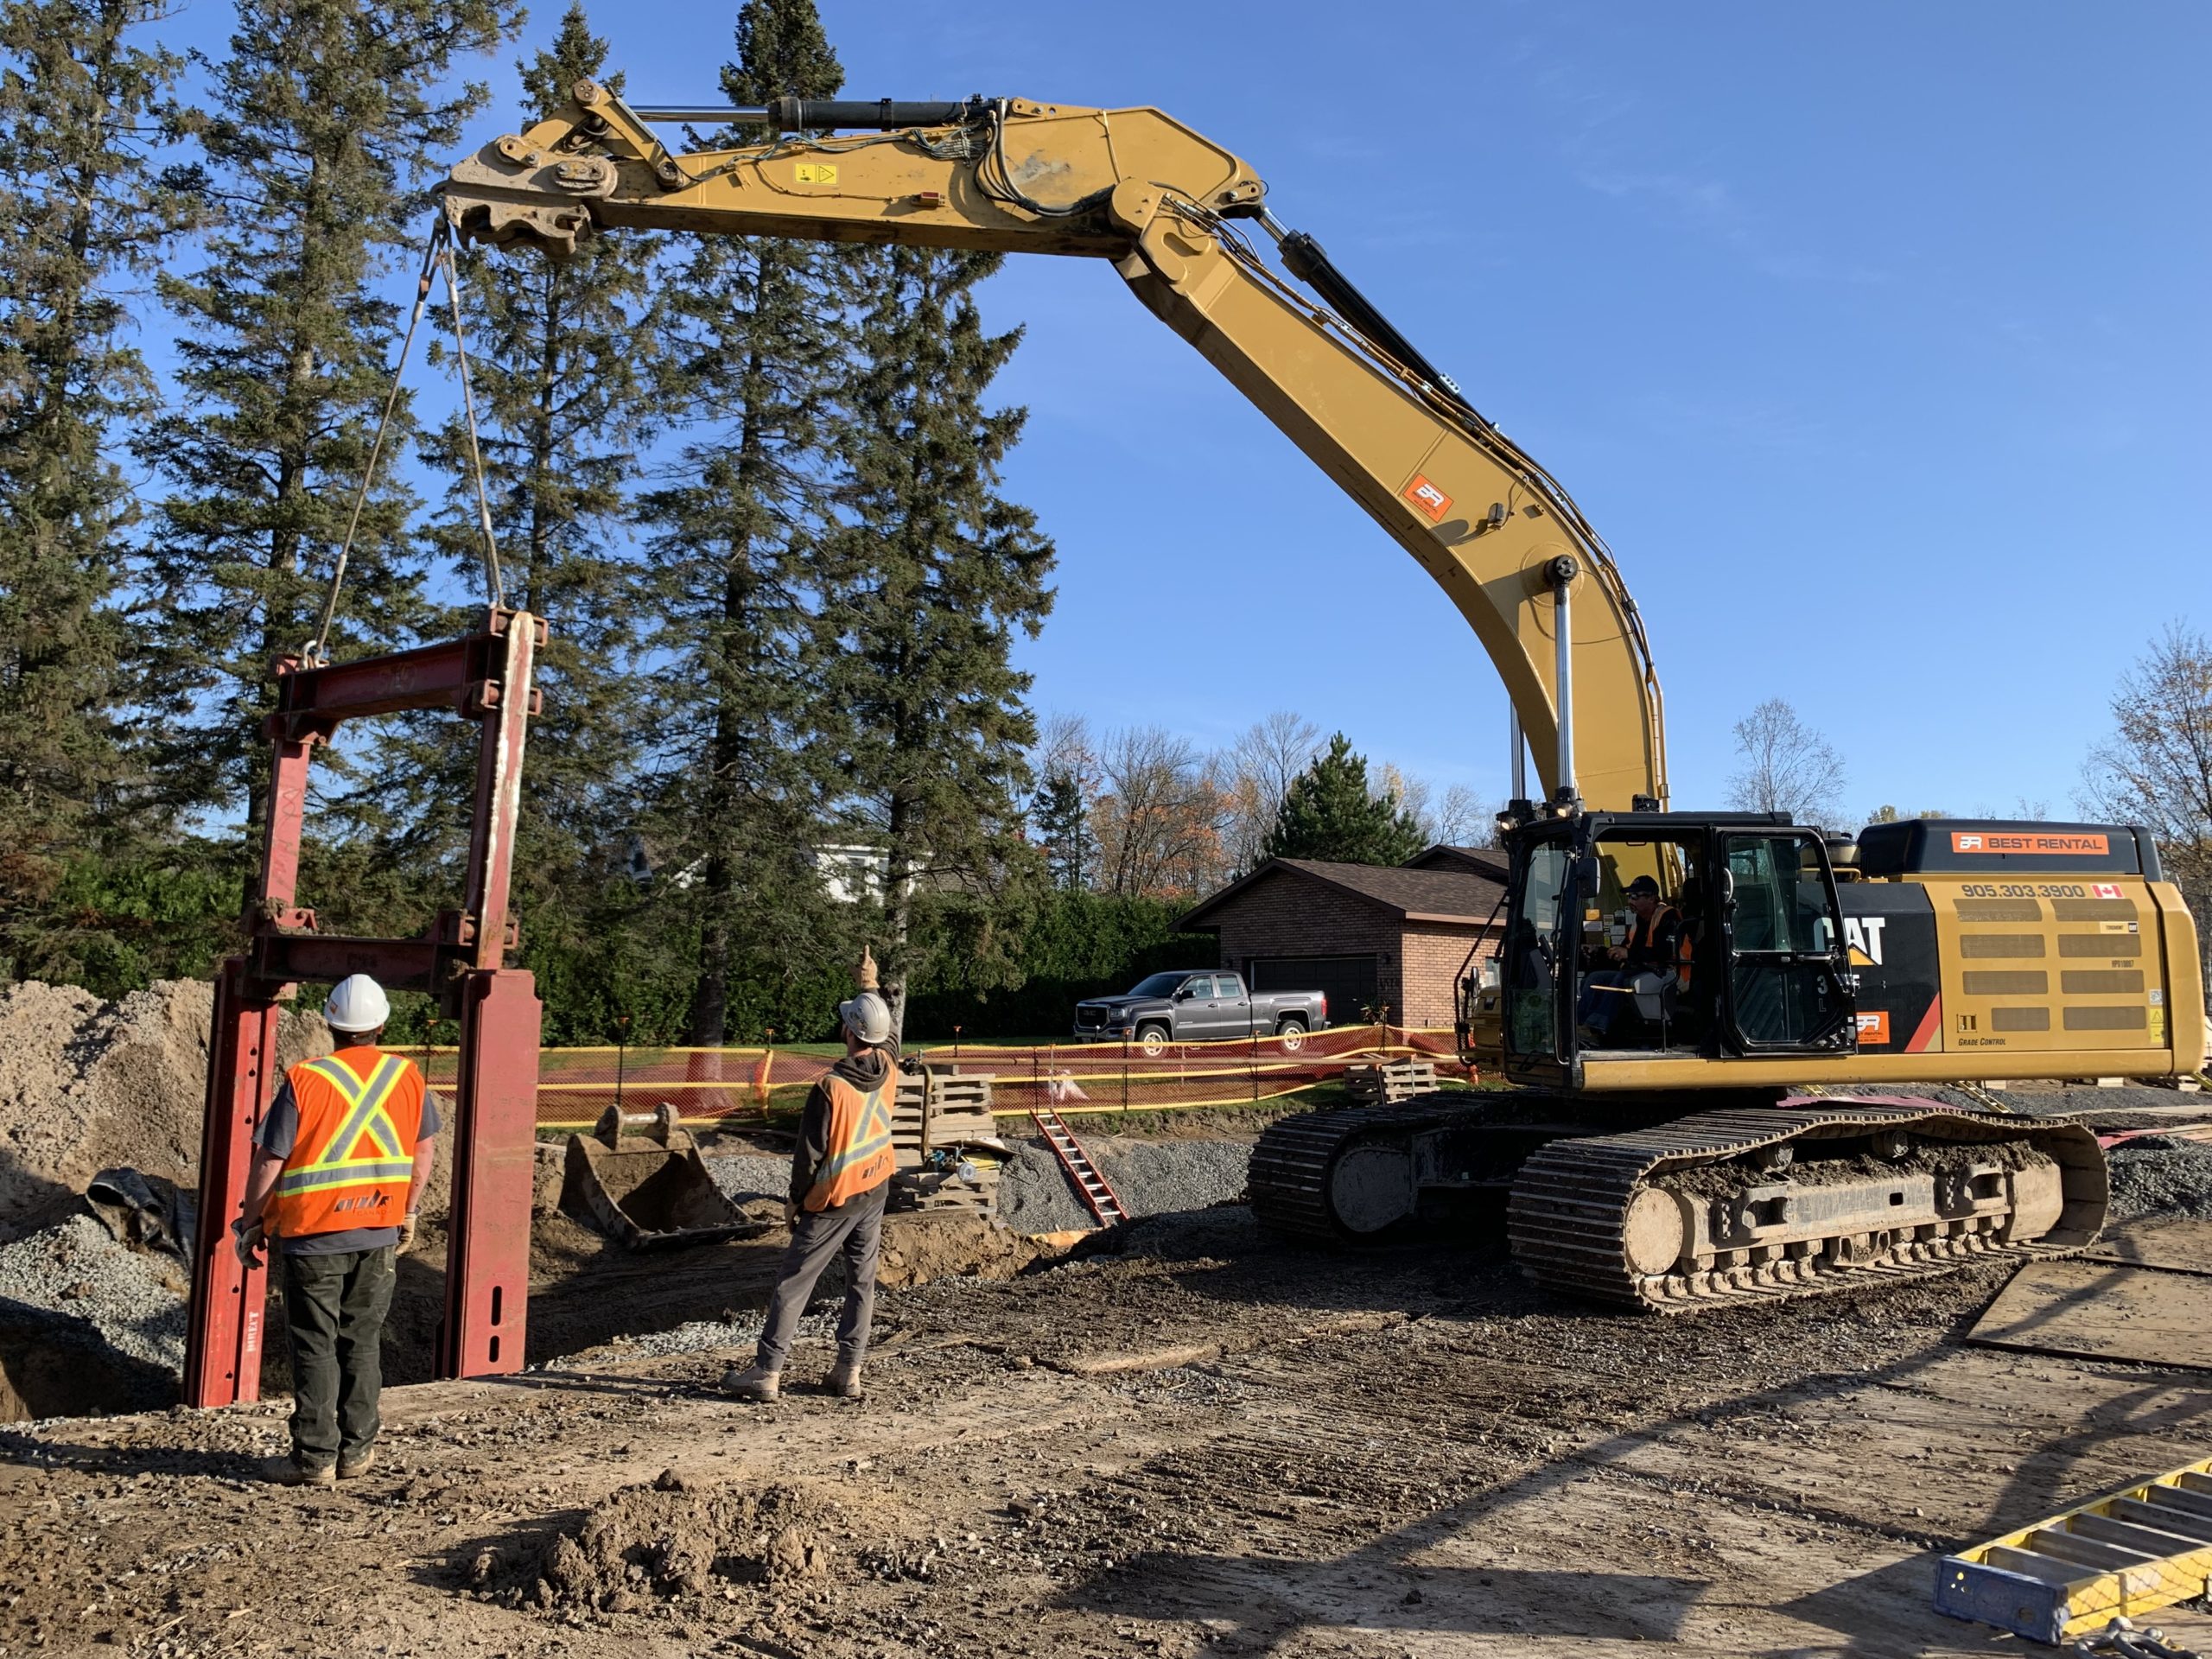 Foreman Waylon Spicer and Brandon Wolsing are assisting Kevin Robidoux who is operating a Cat 349 excavator.